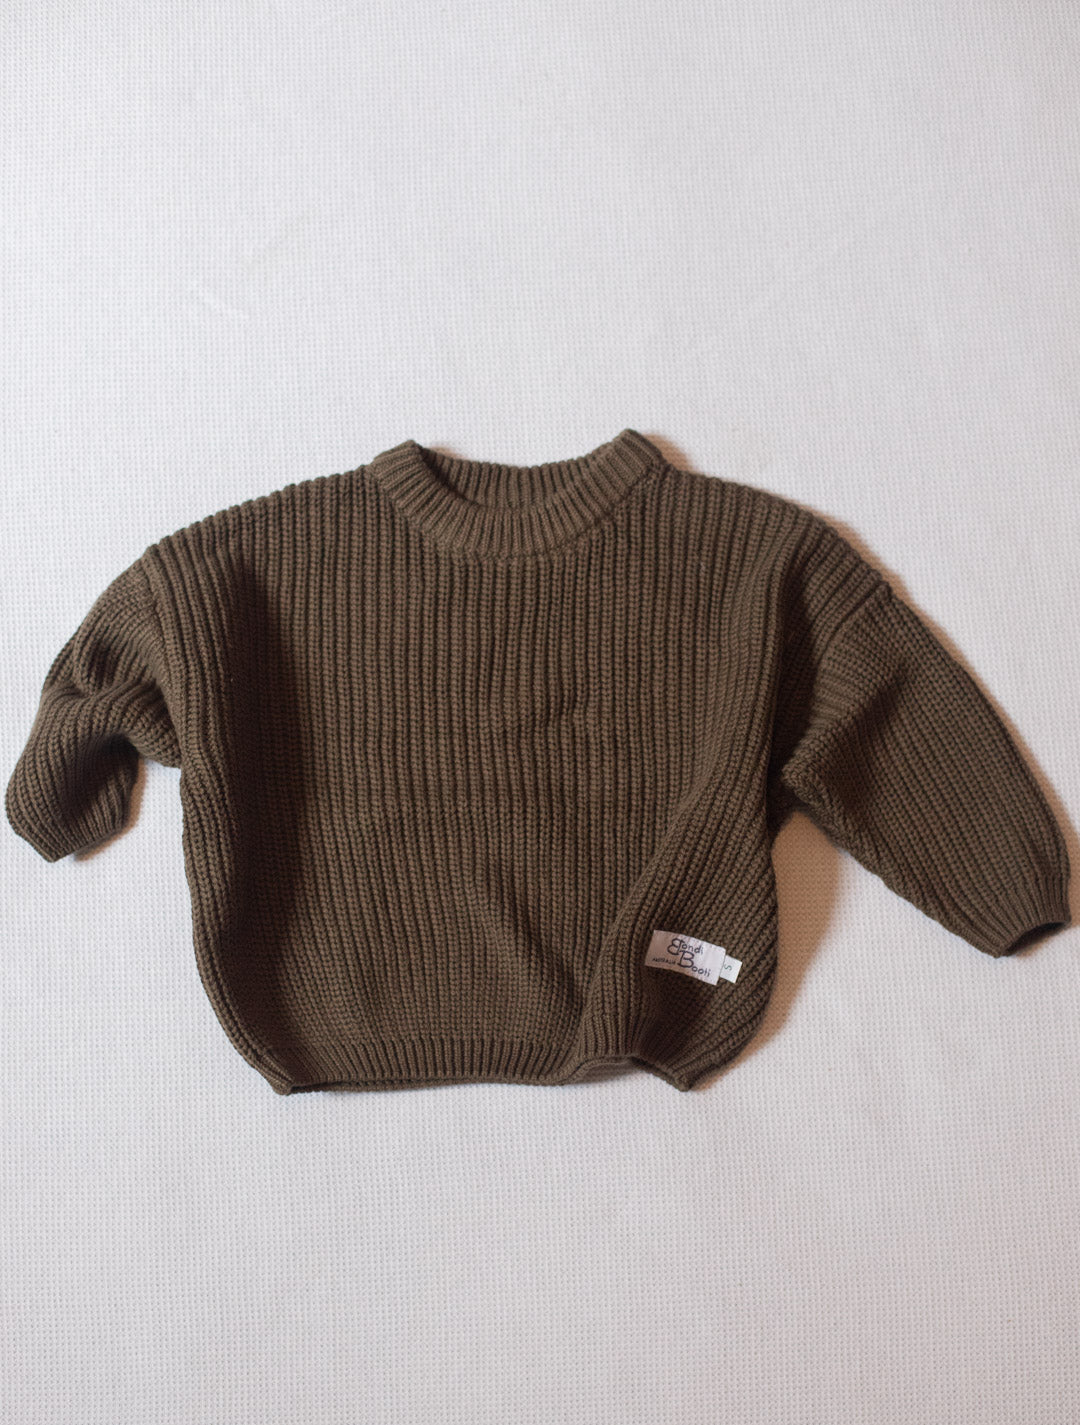 Knit Jumper For Baby